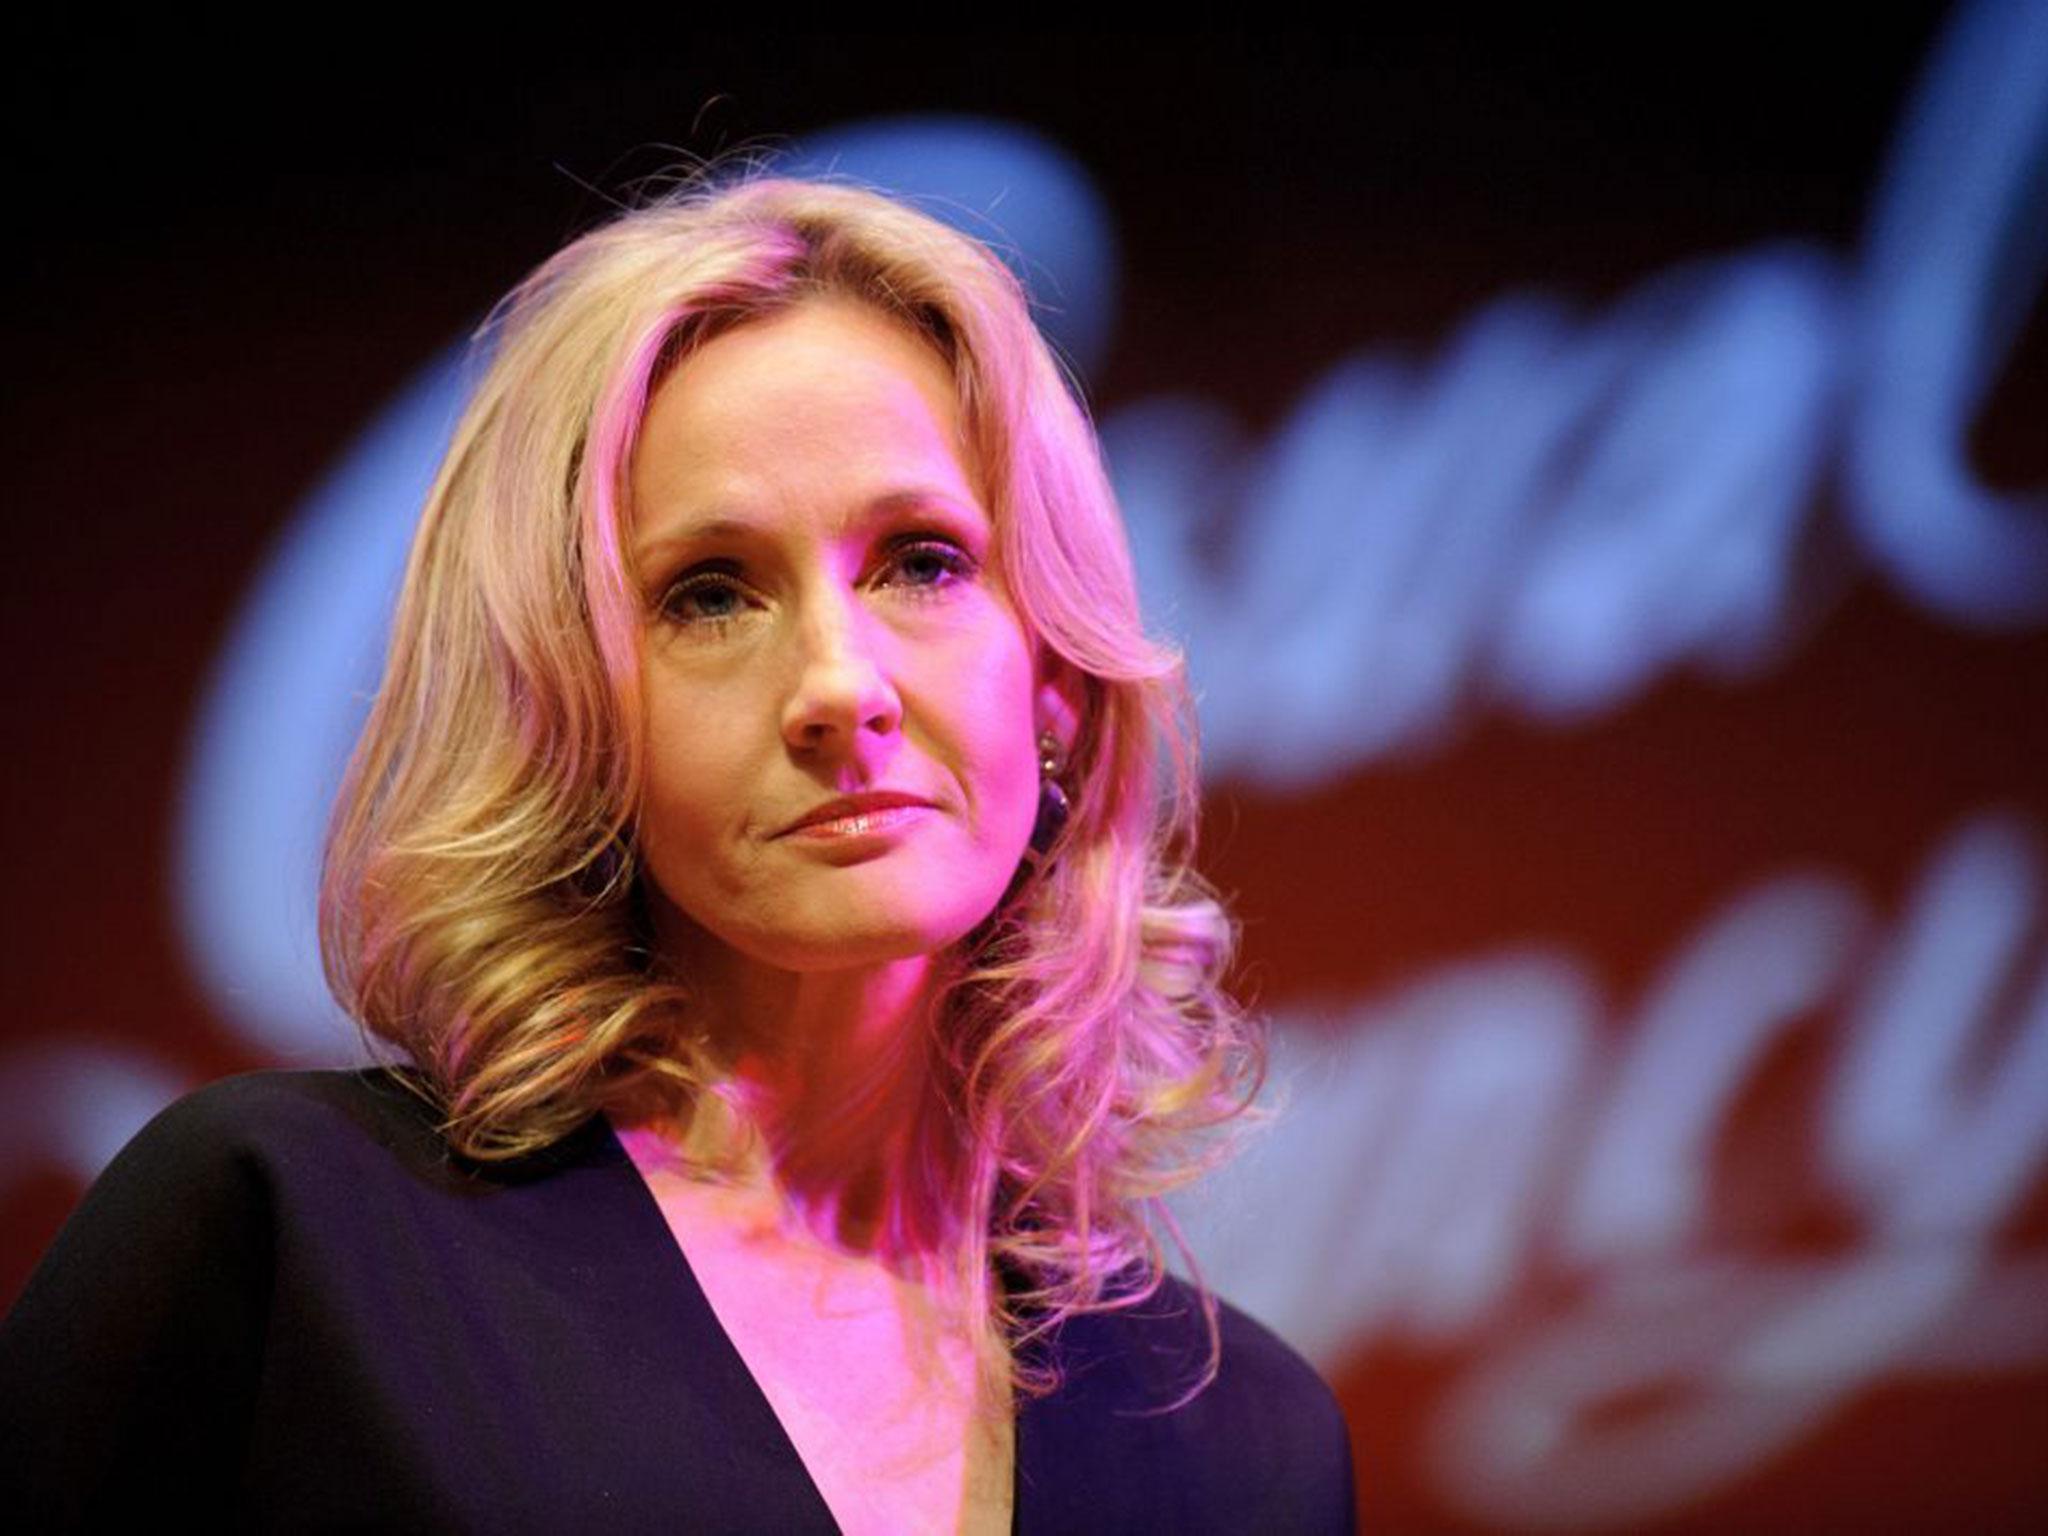 Rowling’s charity Lumos has done a great deal of research into the dangers of child institutionalisation and works to support the eight million children who are currently living in institutions worldwide